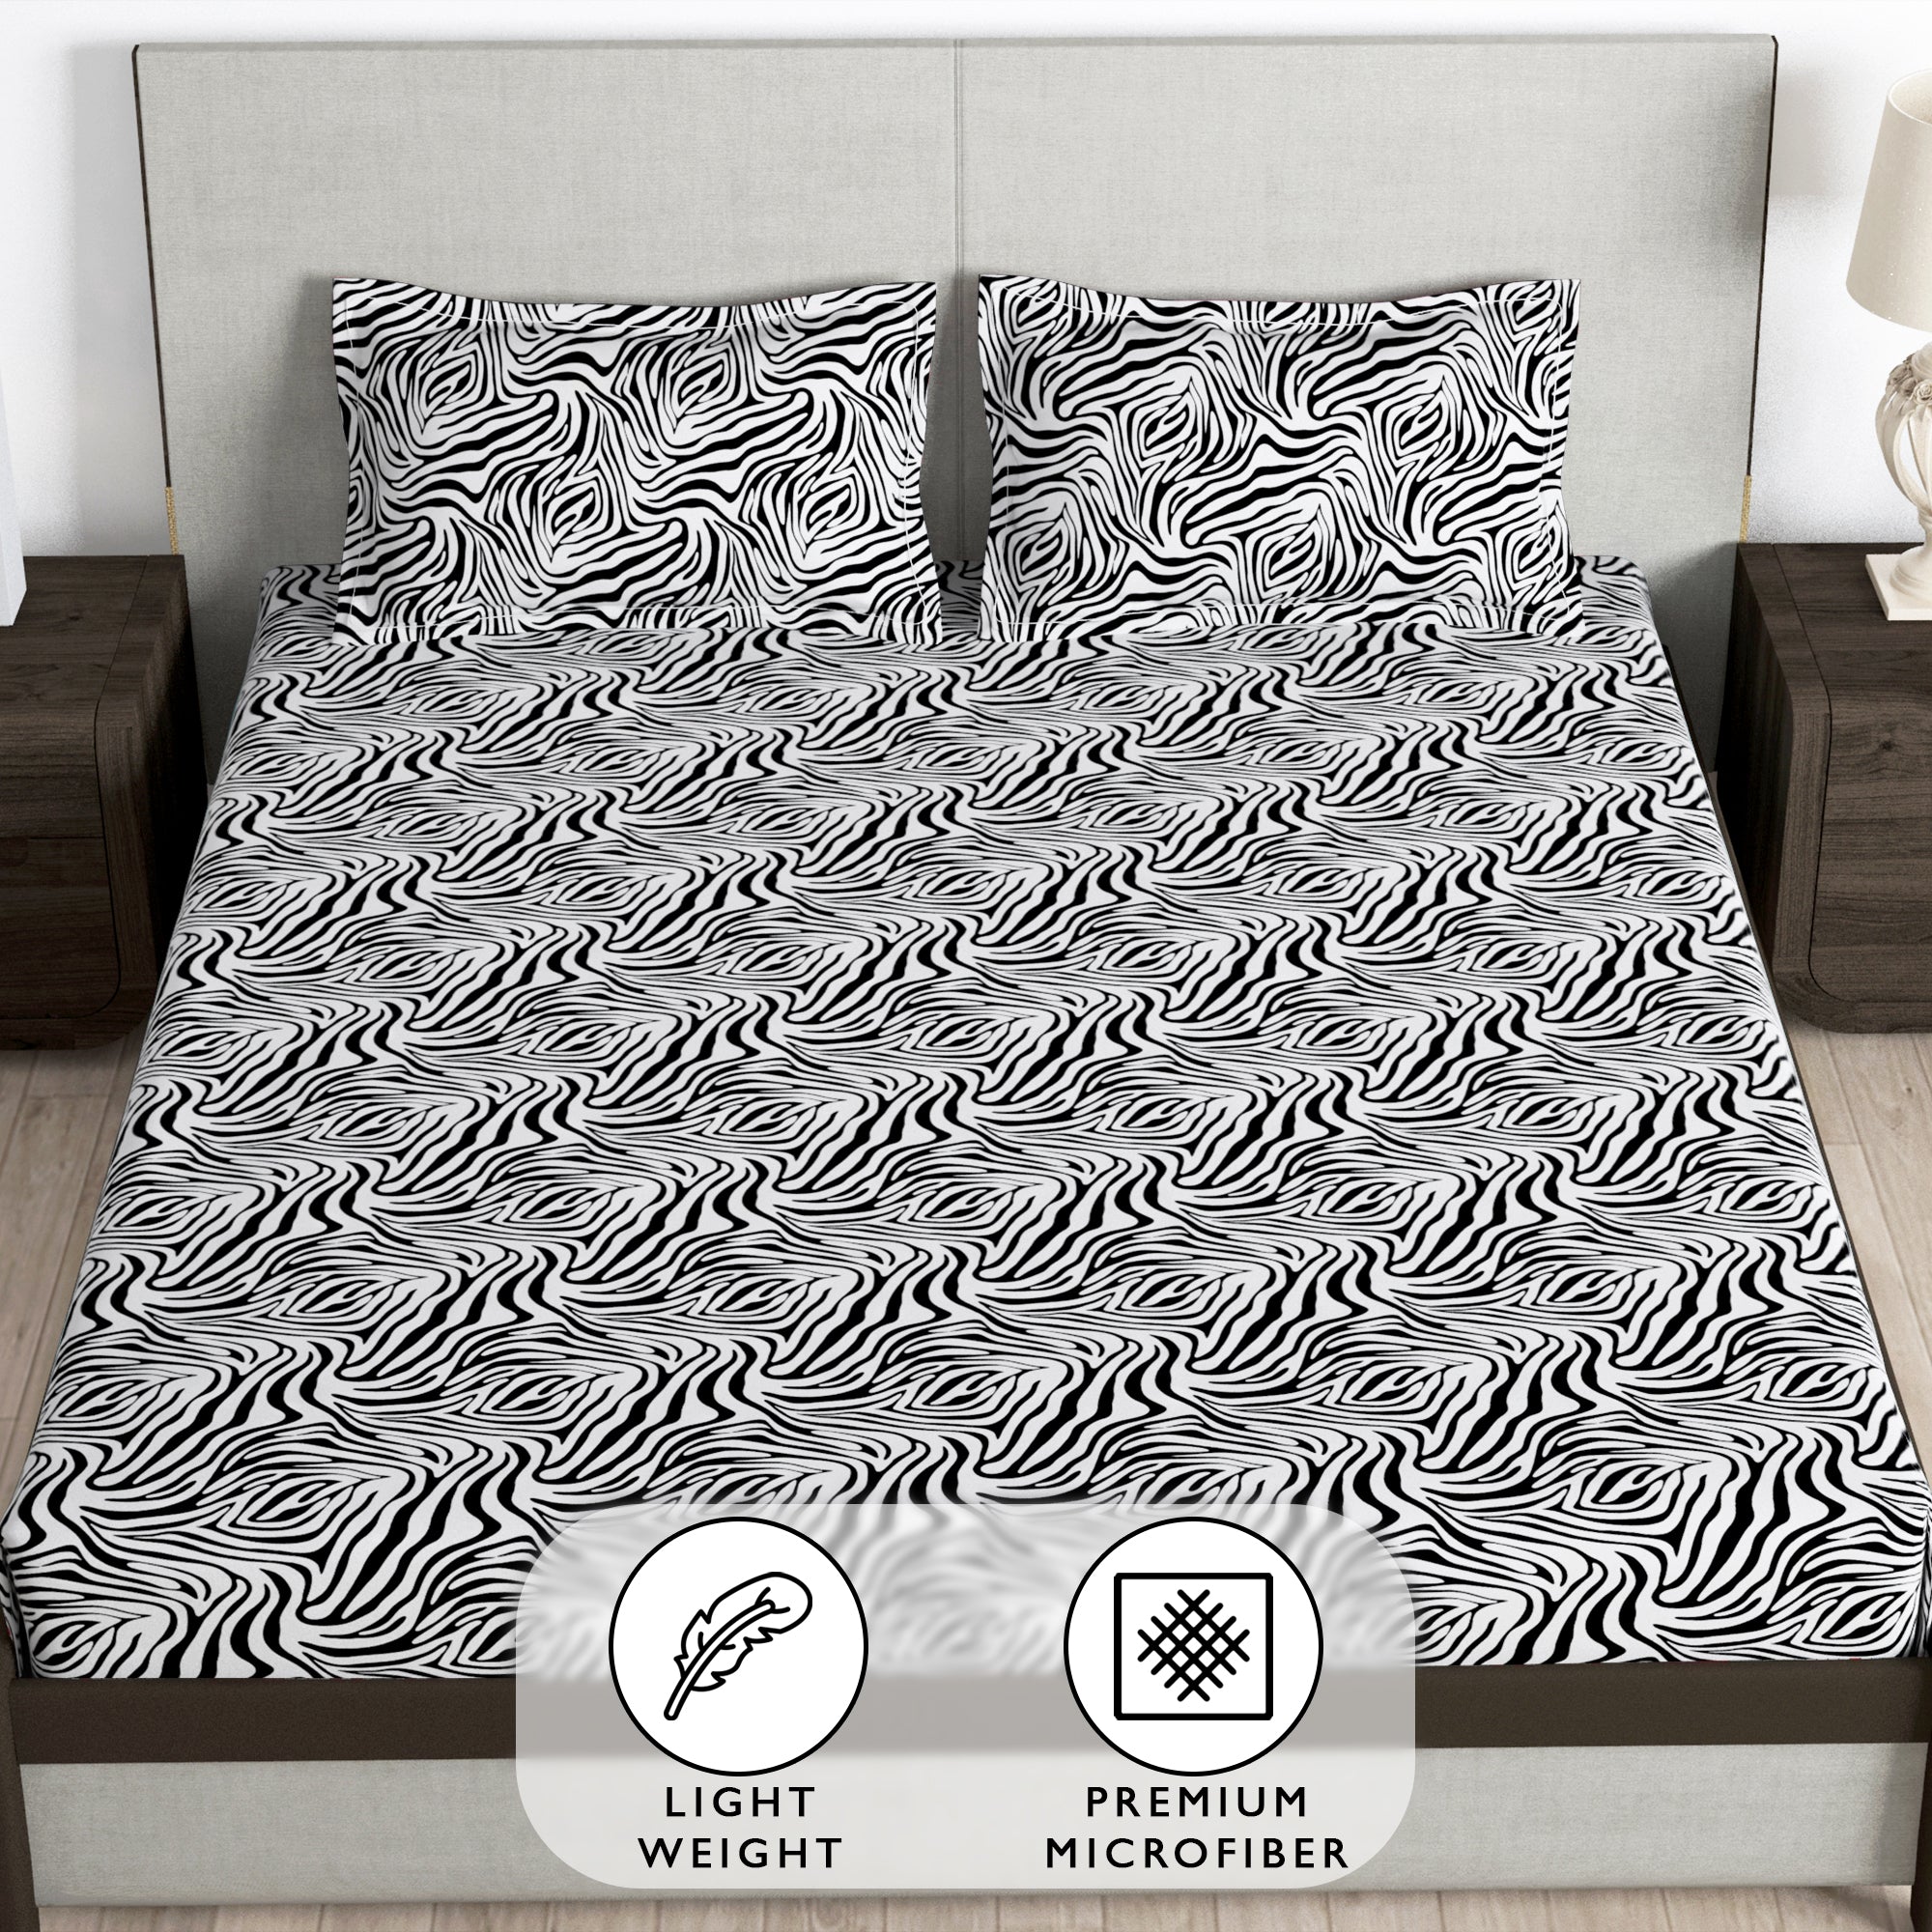 Story@Home 2 Pcs Arena Microfiber Double Bedsheets Combo With 4 Pillow Covers - Black & Grey